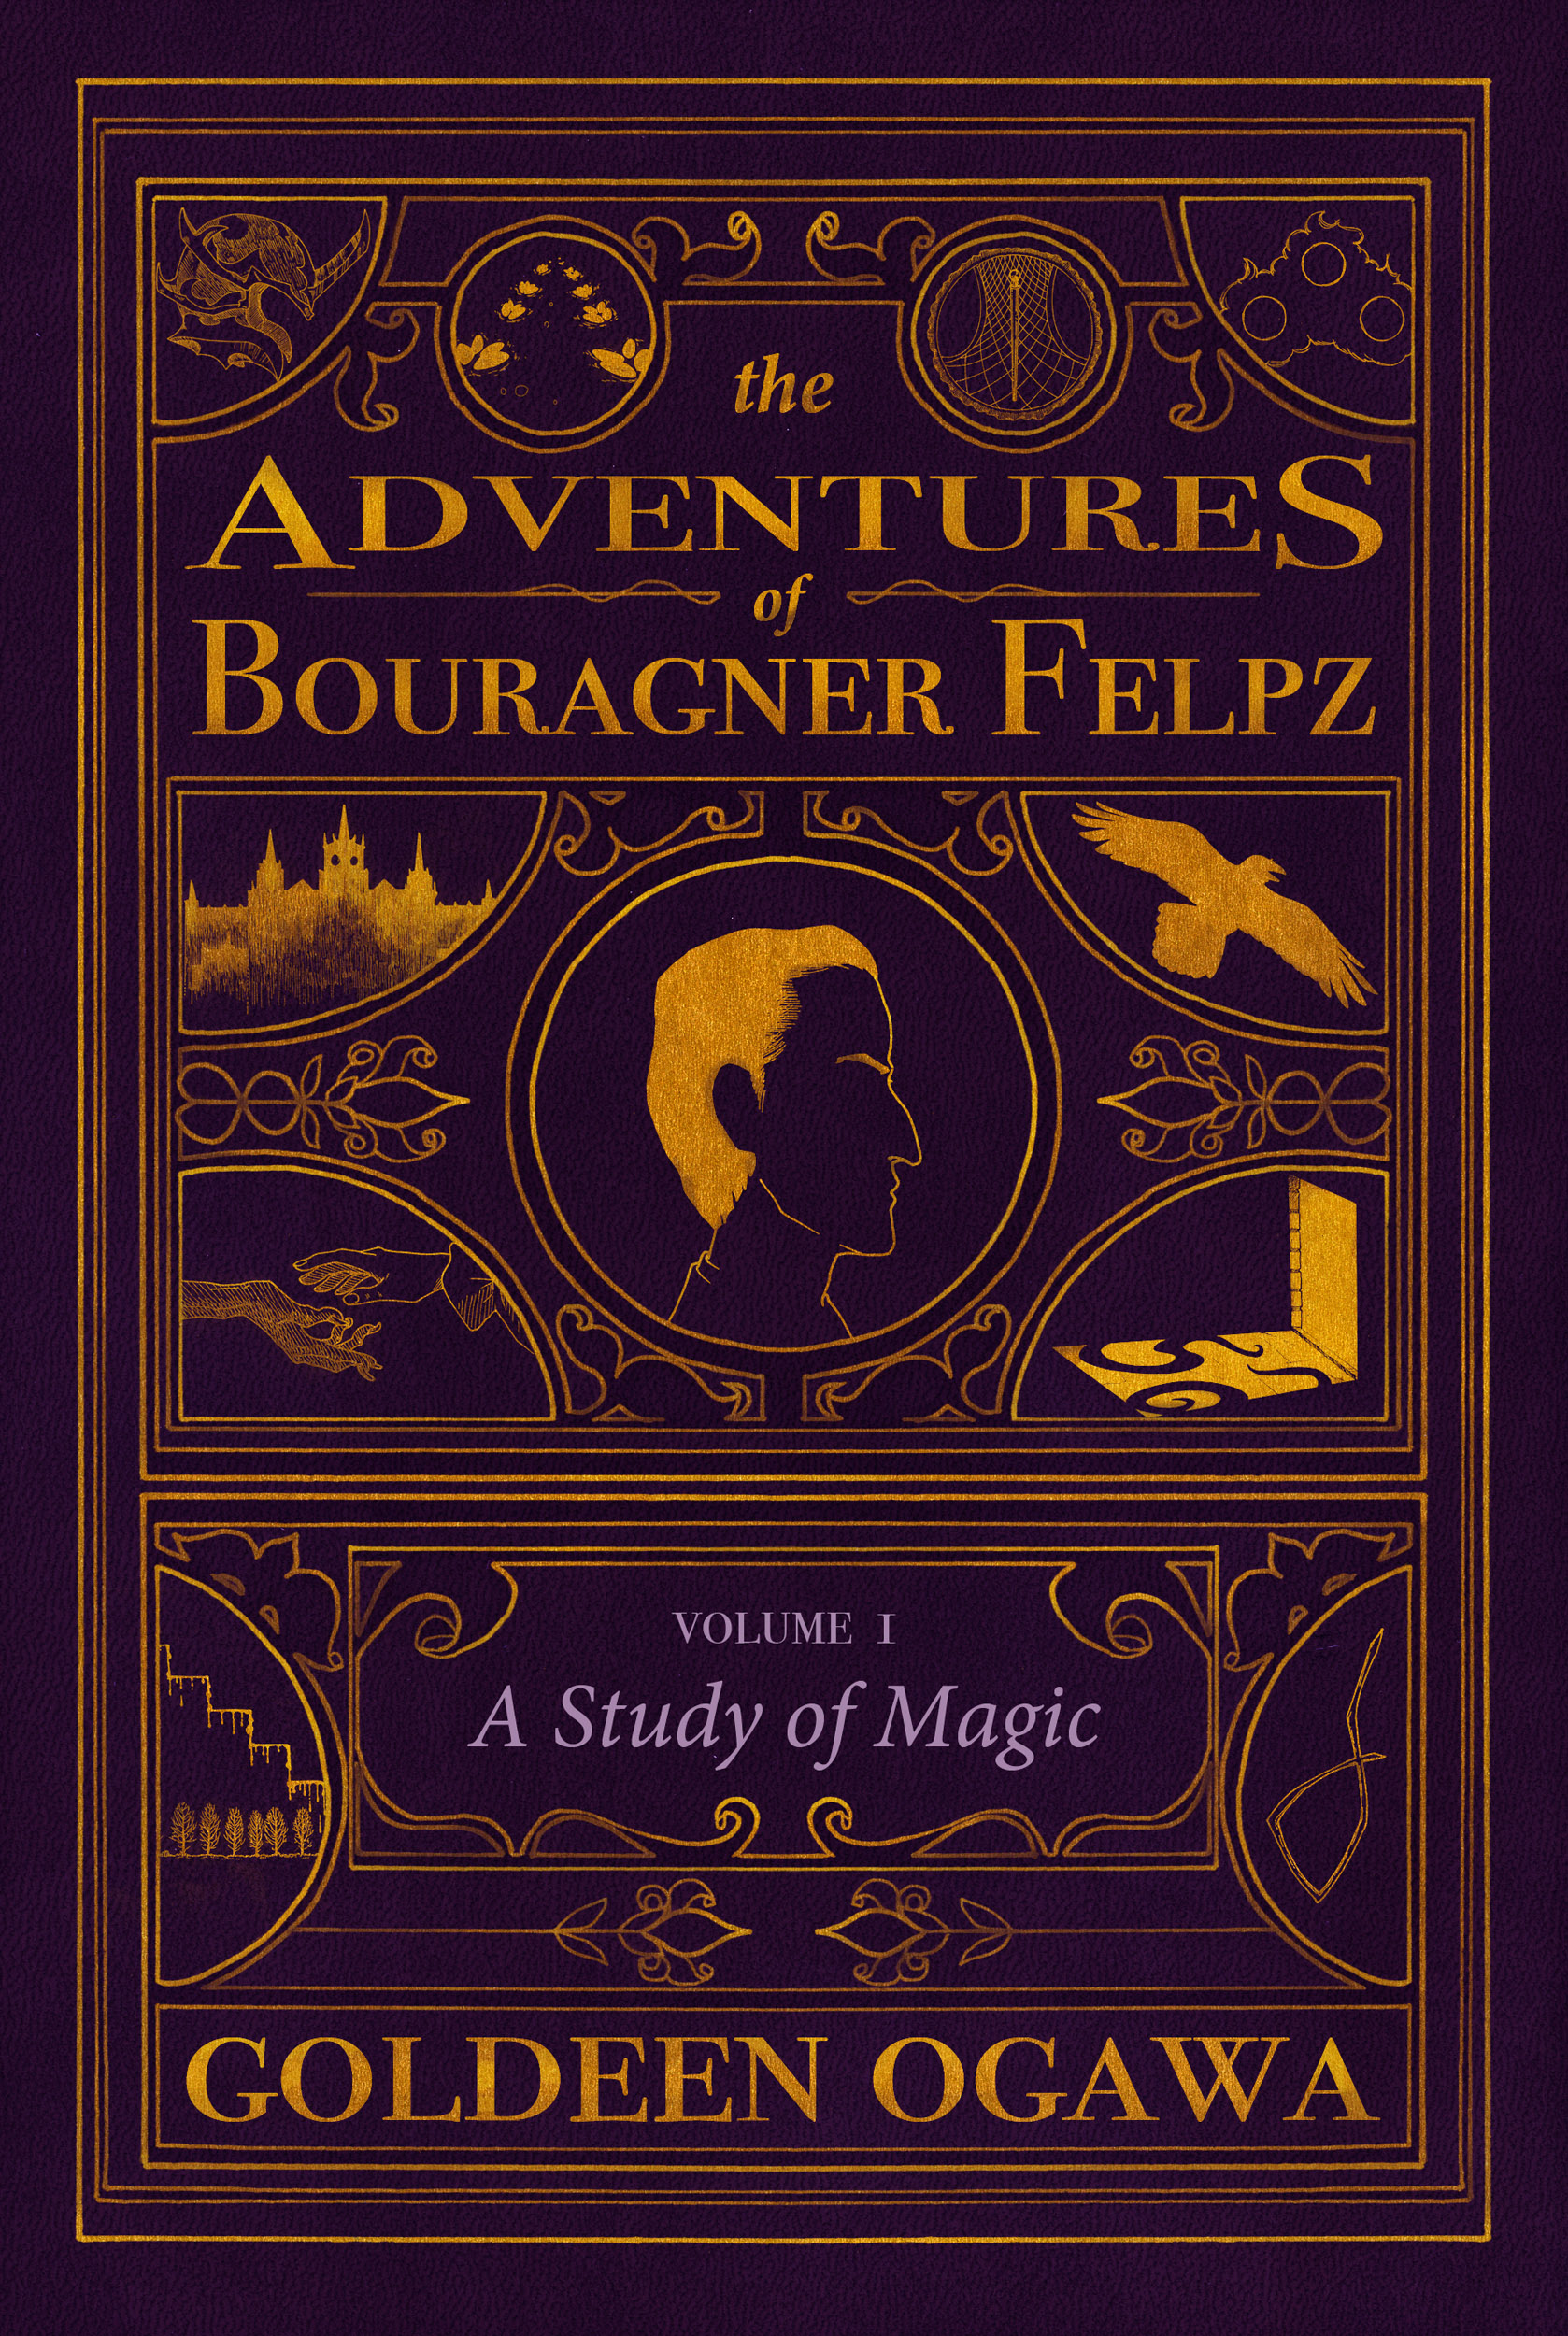 Cover image for Vol I: A Study of MagicThe first eleven stories chronicle Corianne's early adventures with Bouragner Felpz—from their first awkward foray into a cursed mansion, to the last mission Corianne undertook as a young woman.